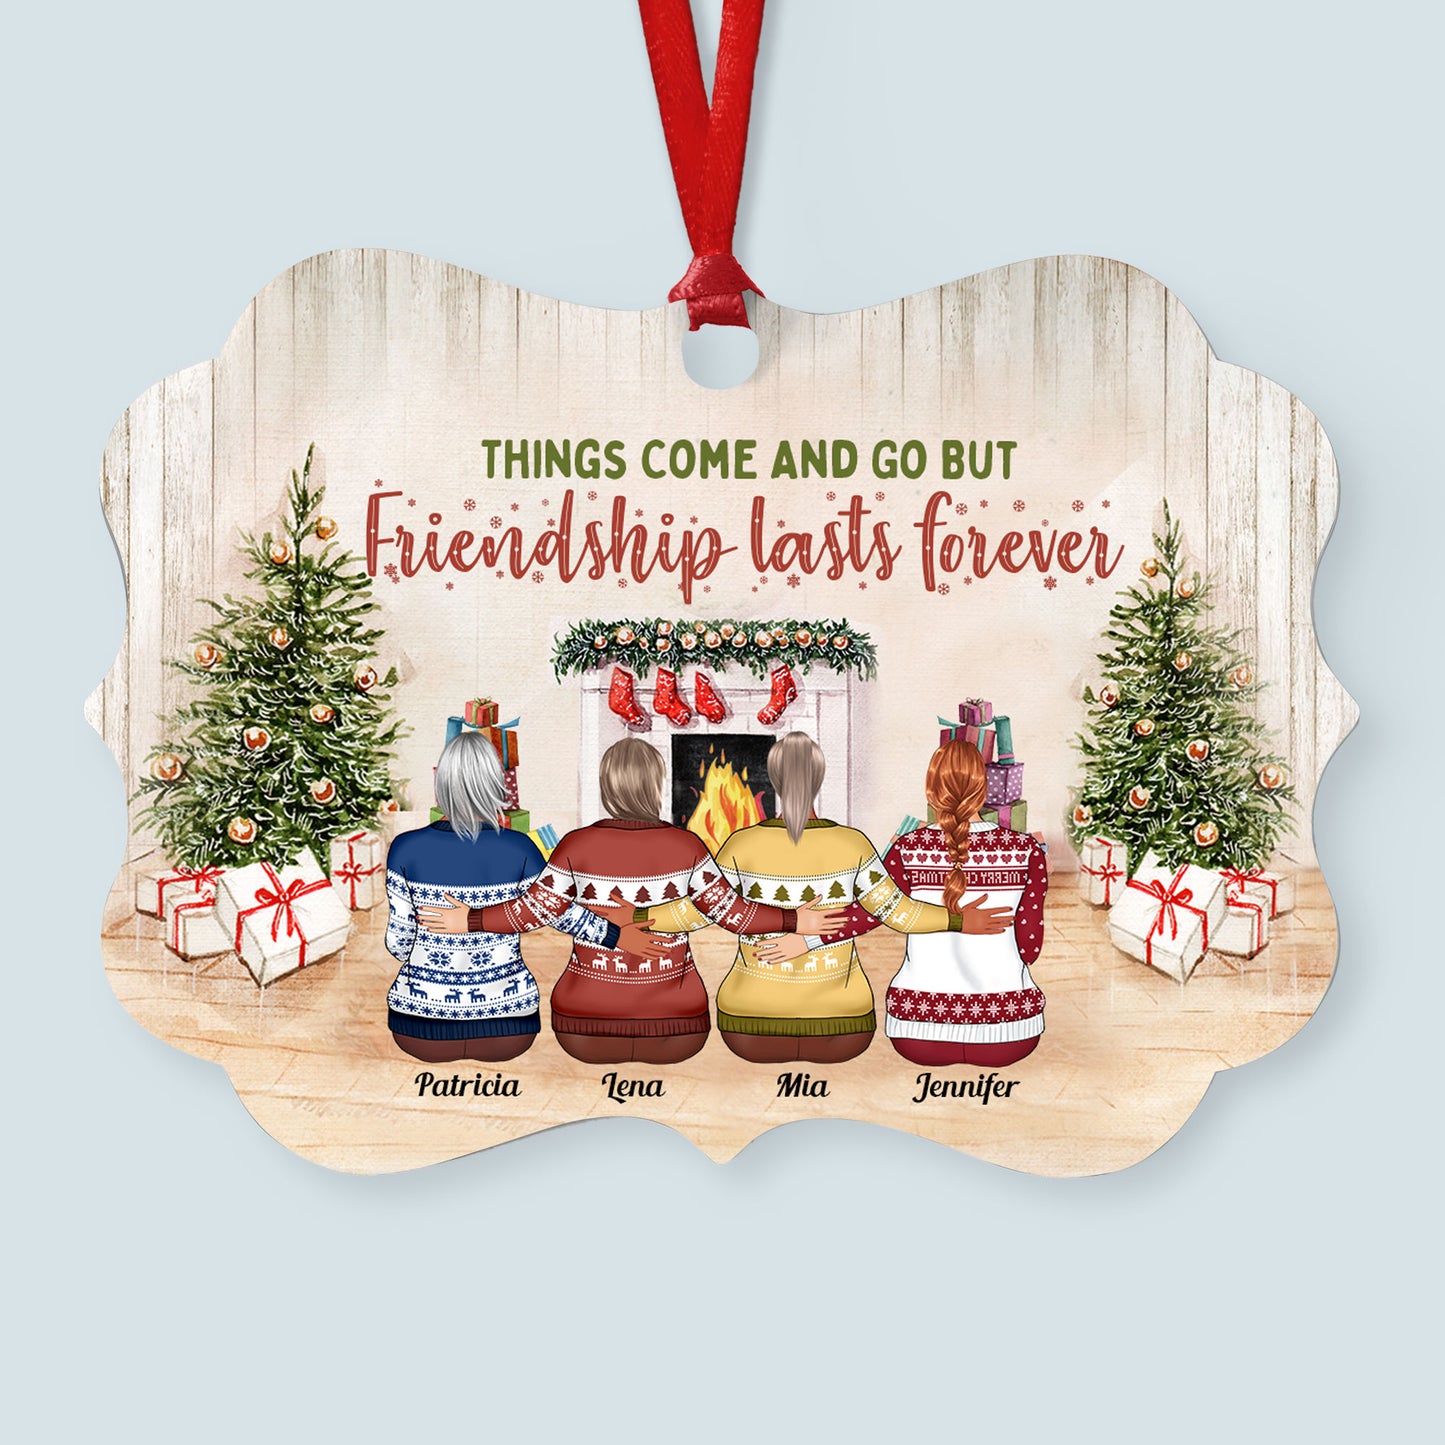 Things Come And Go But Friendship Lasts Forever - Personalized Aluminum Ornament - Christmas Gift For Friends - Family Hugging